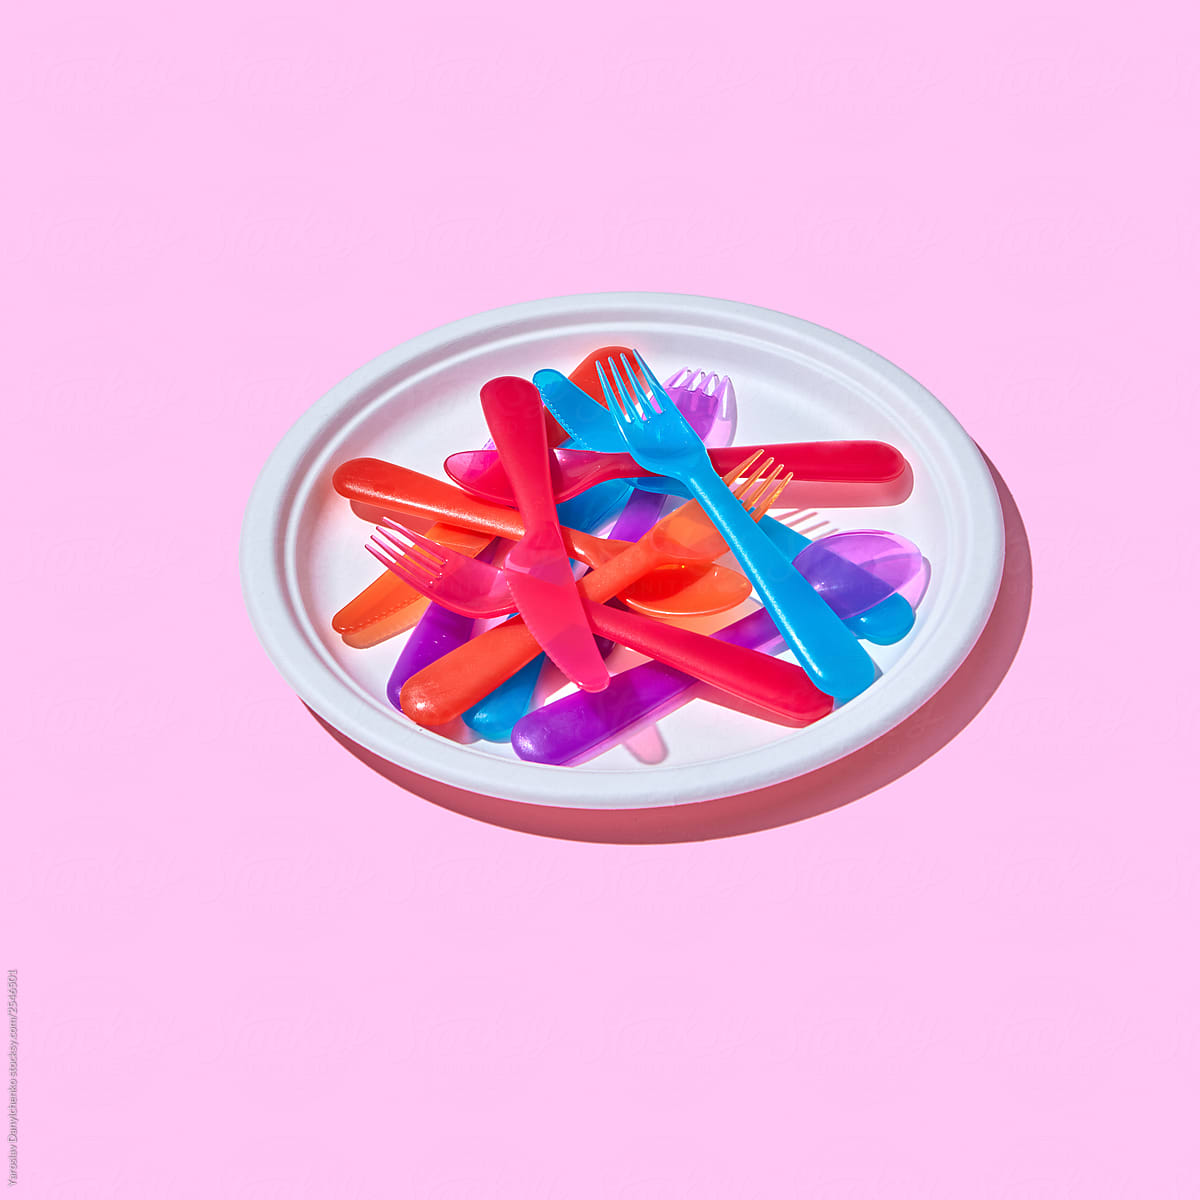 Plastic plate with knives, forks and spoons on a pink background